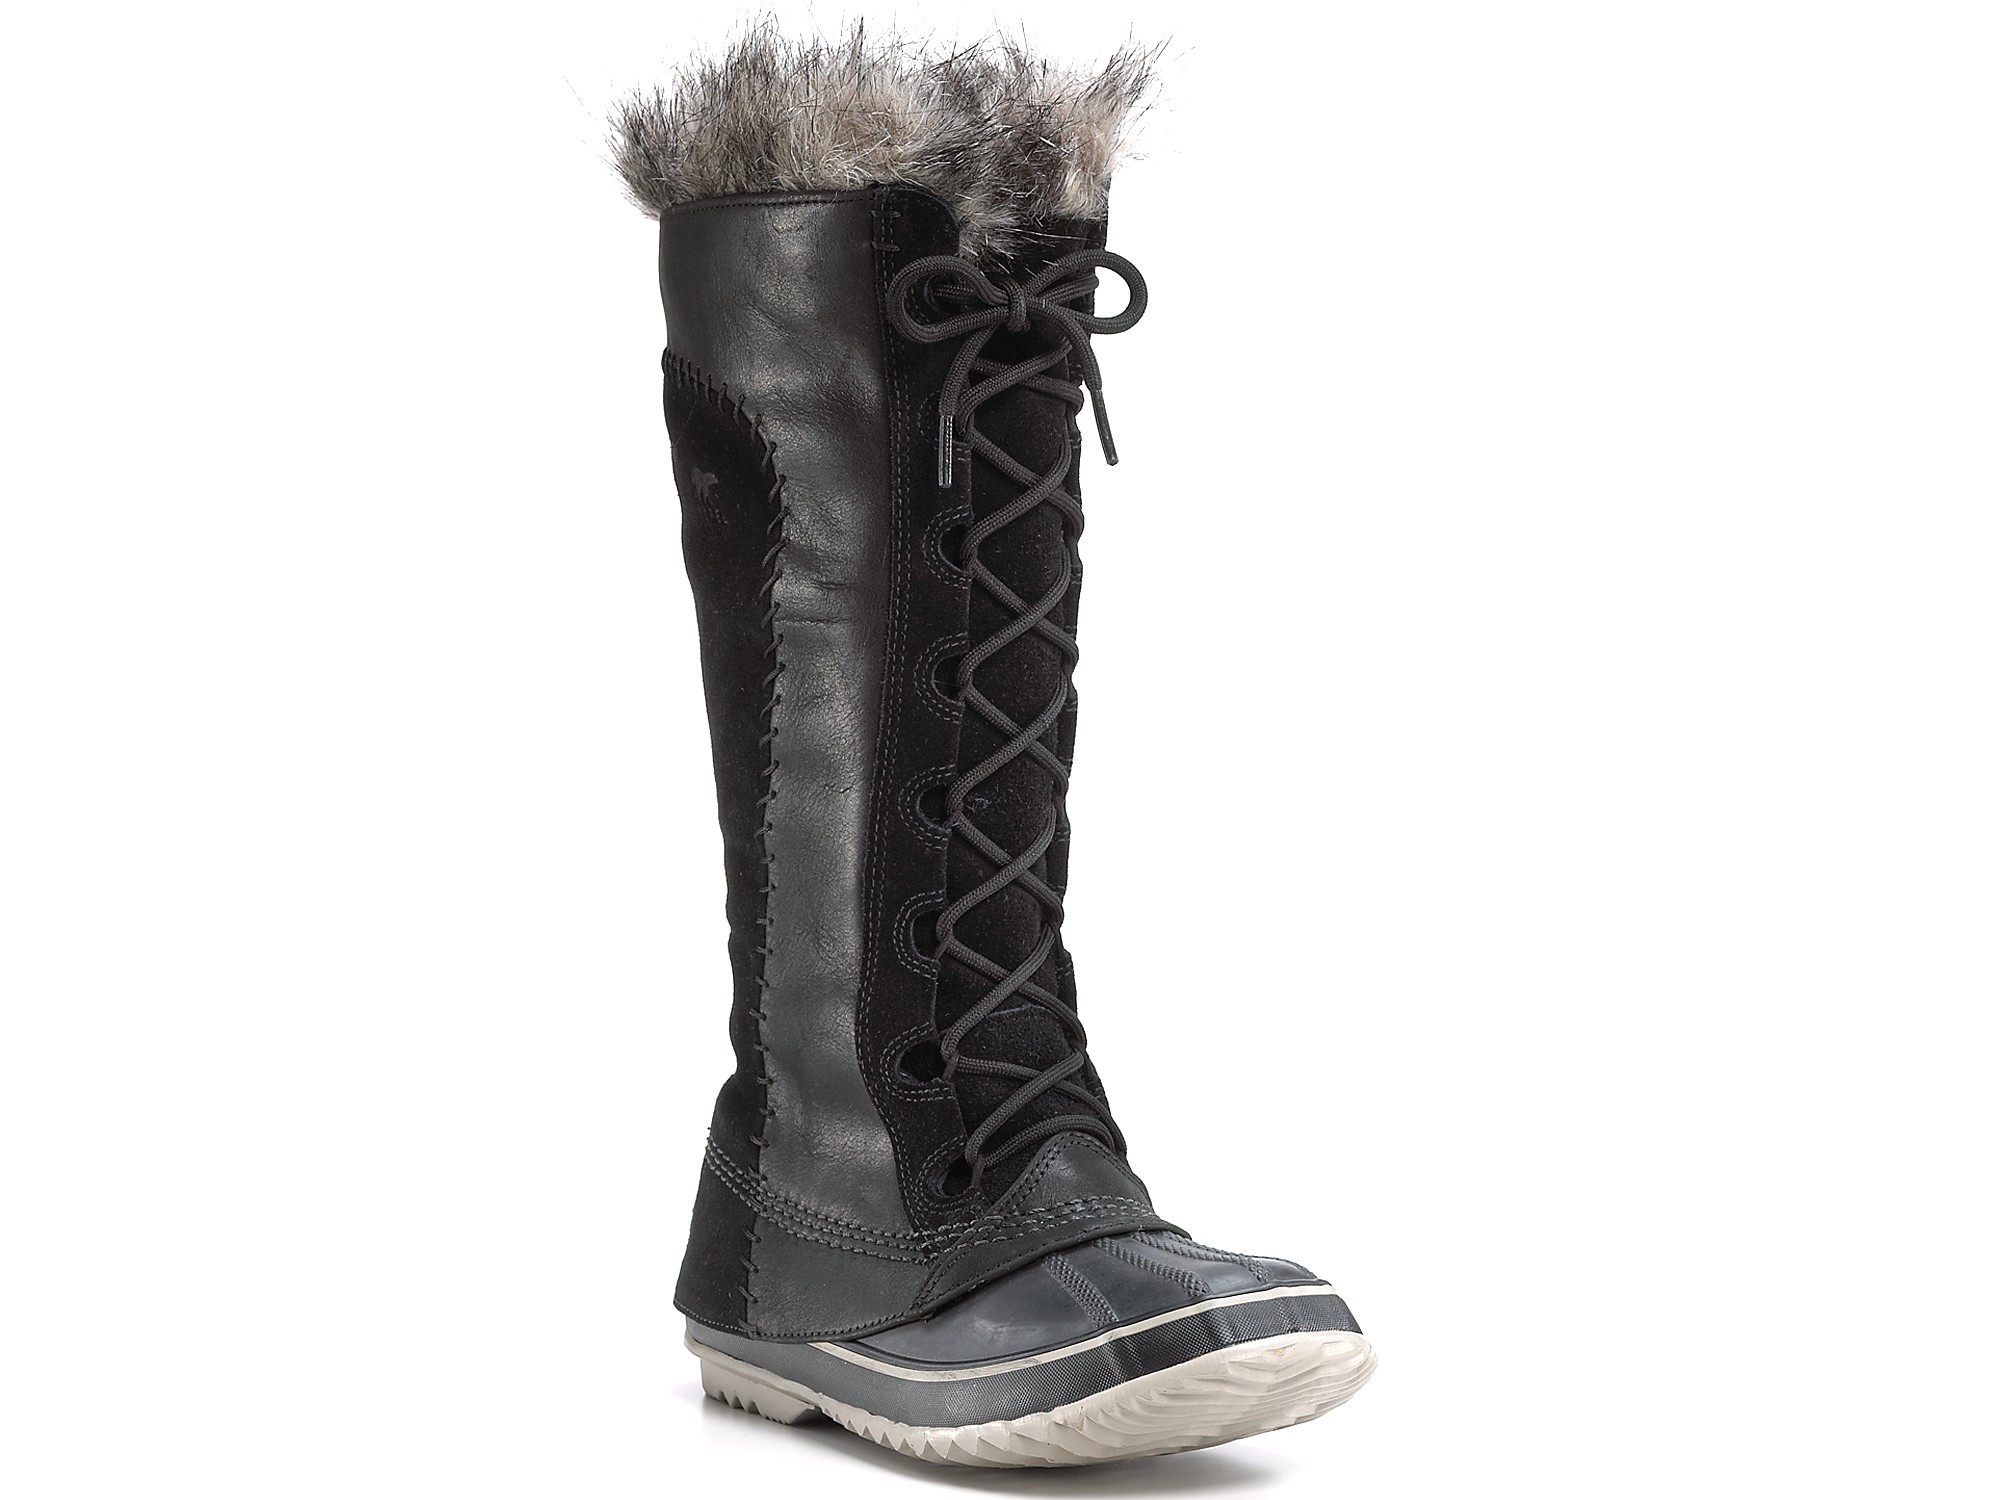 Lyst Sorel Cate The Great Laceup Snow Boots in Black